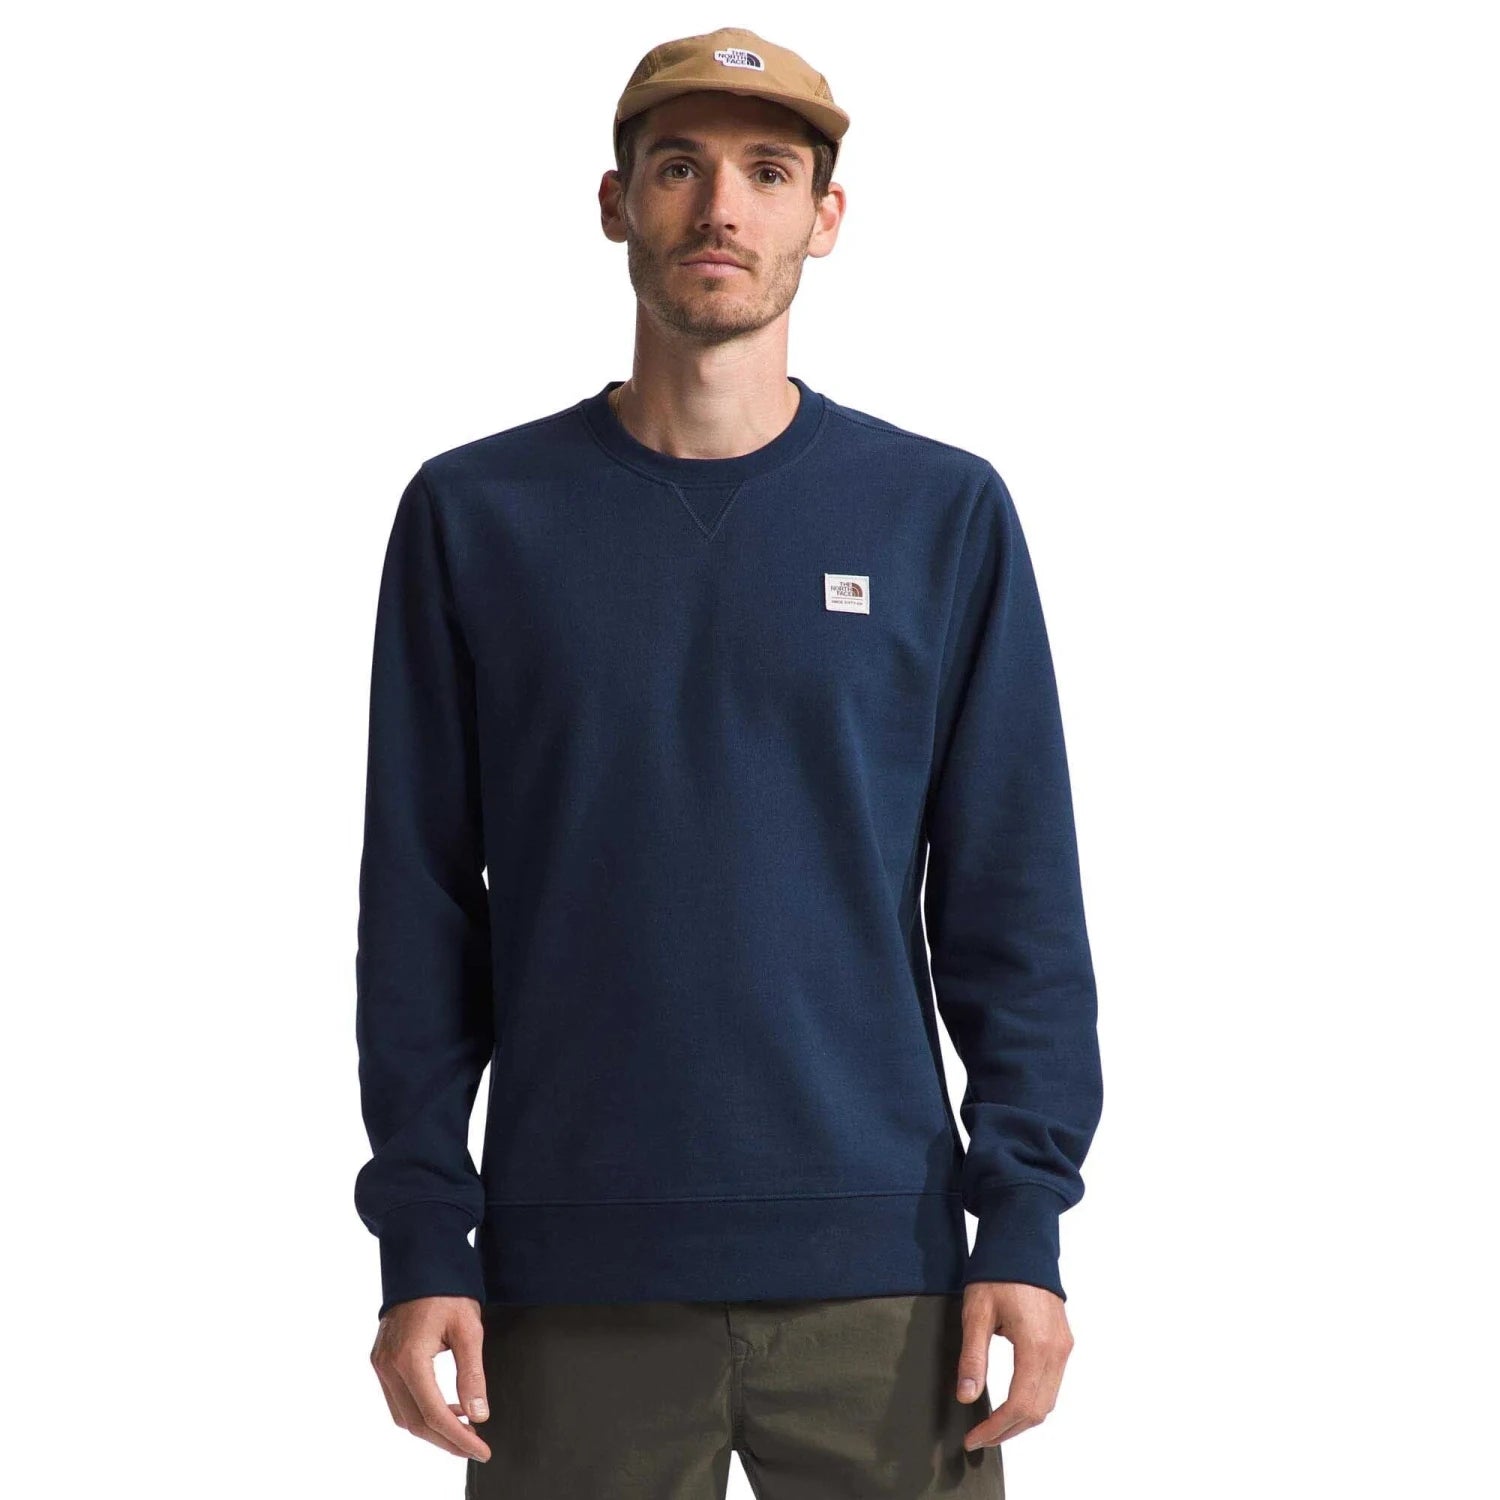 The North Face M's Heritage Patch Crew Sweatshirt, Summit Navy/TNF White, front view on model